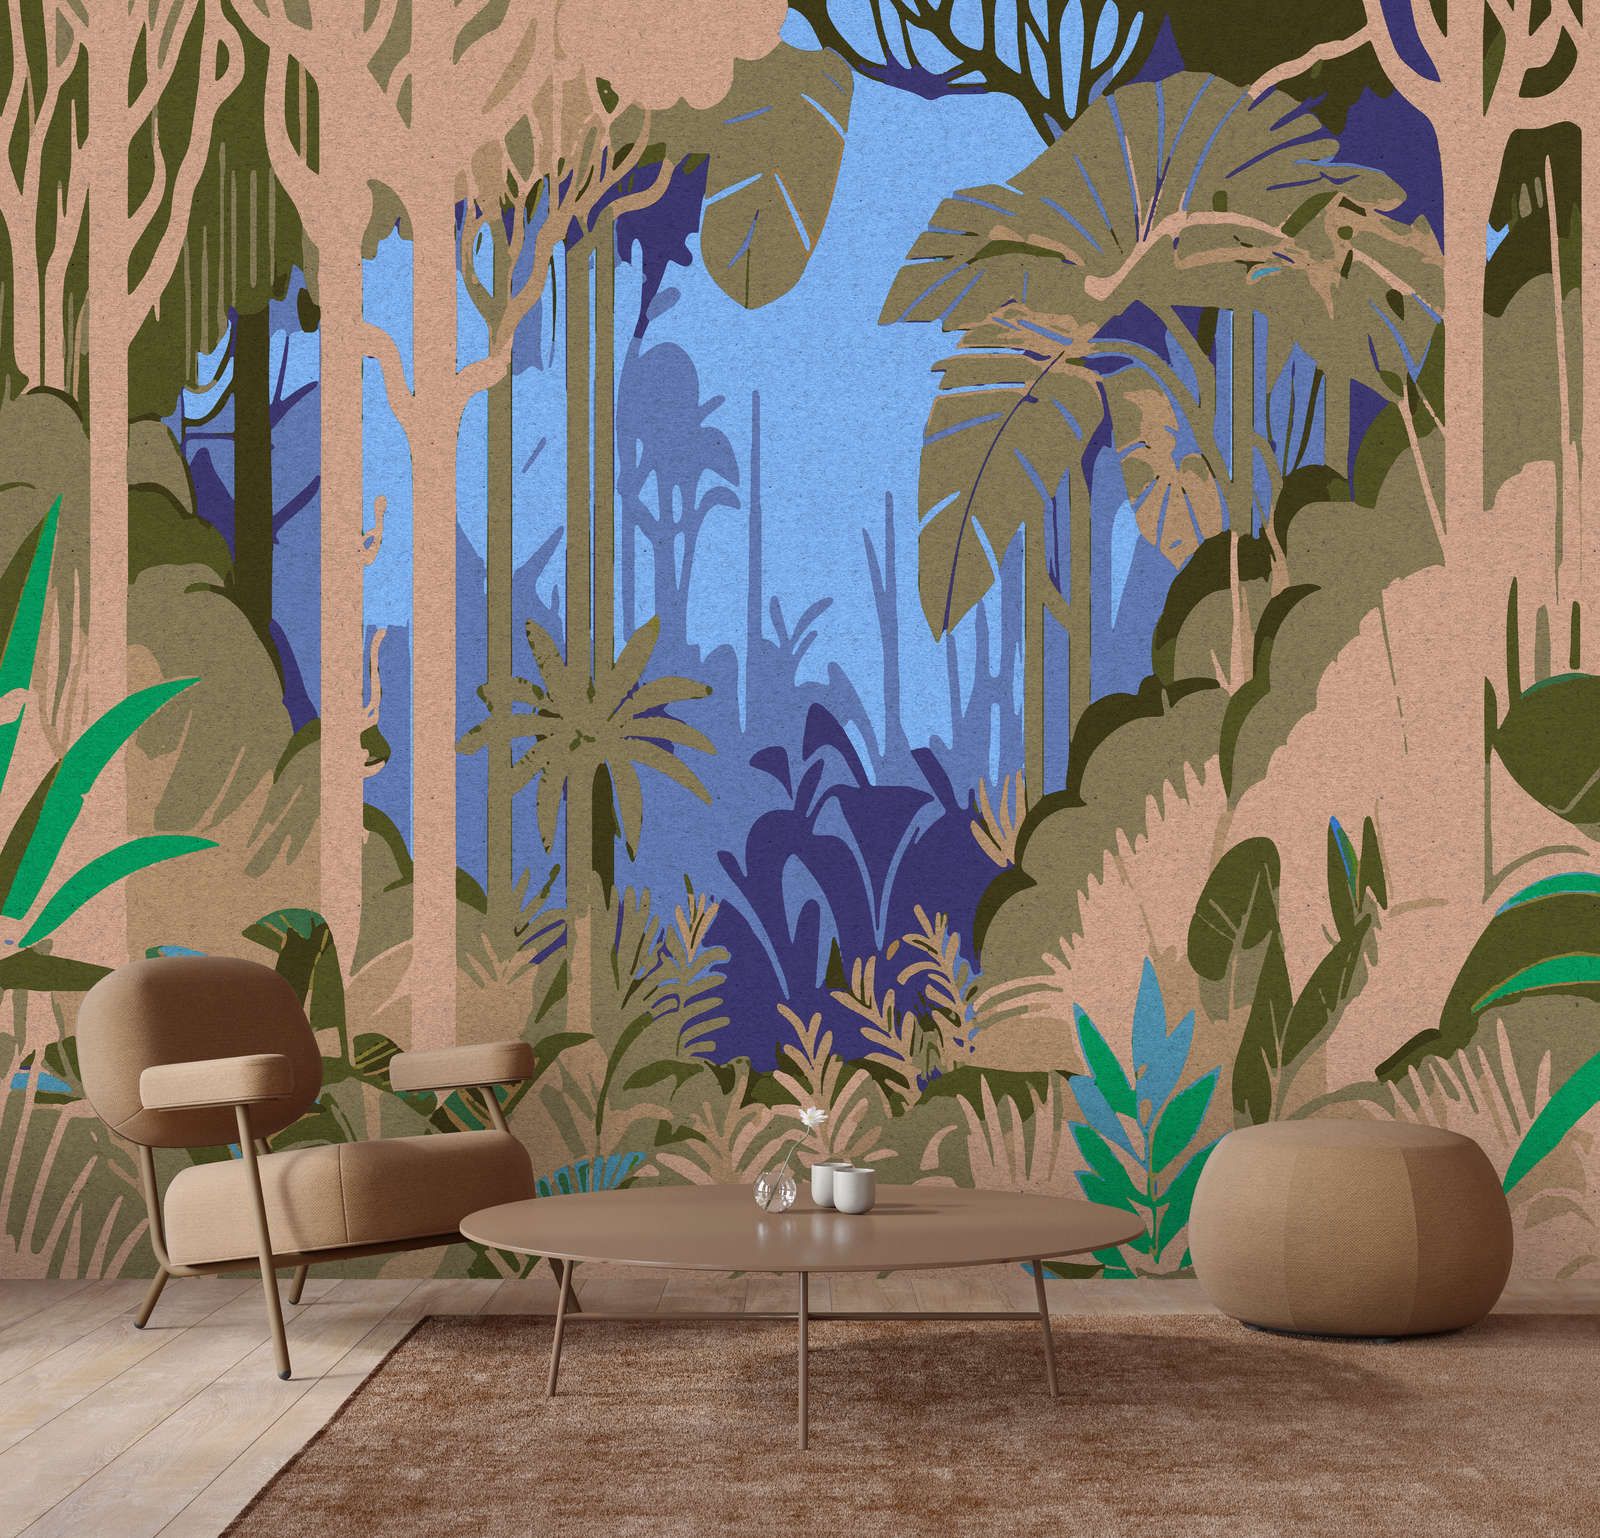             Photo wallpaper »azura« - Abstract jungle motif with kraft paper texture - Smooth, slightly shiny premium non-woven fabric
        